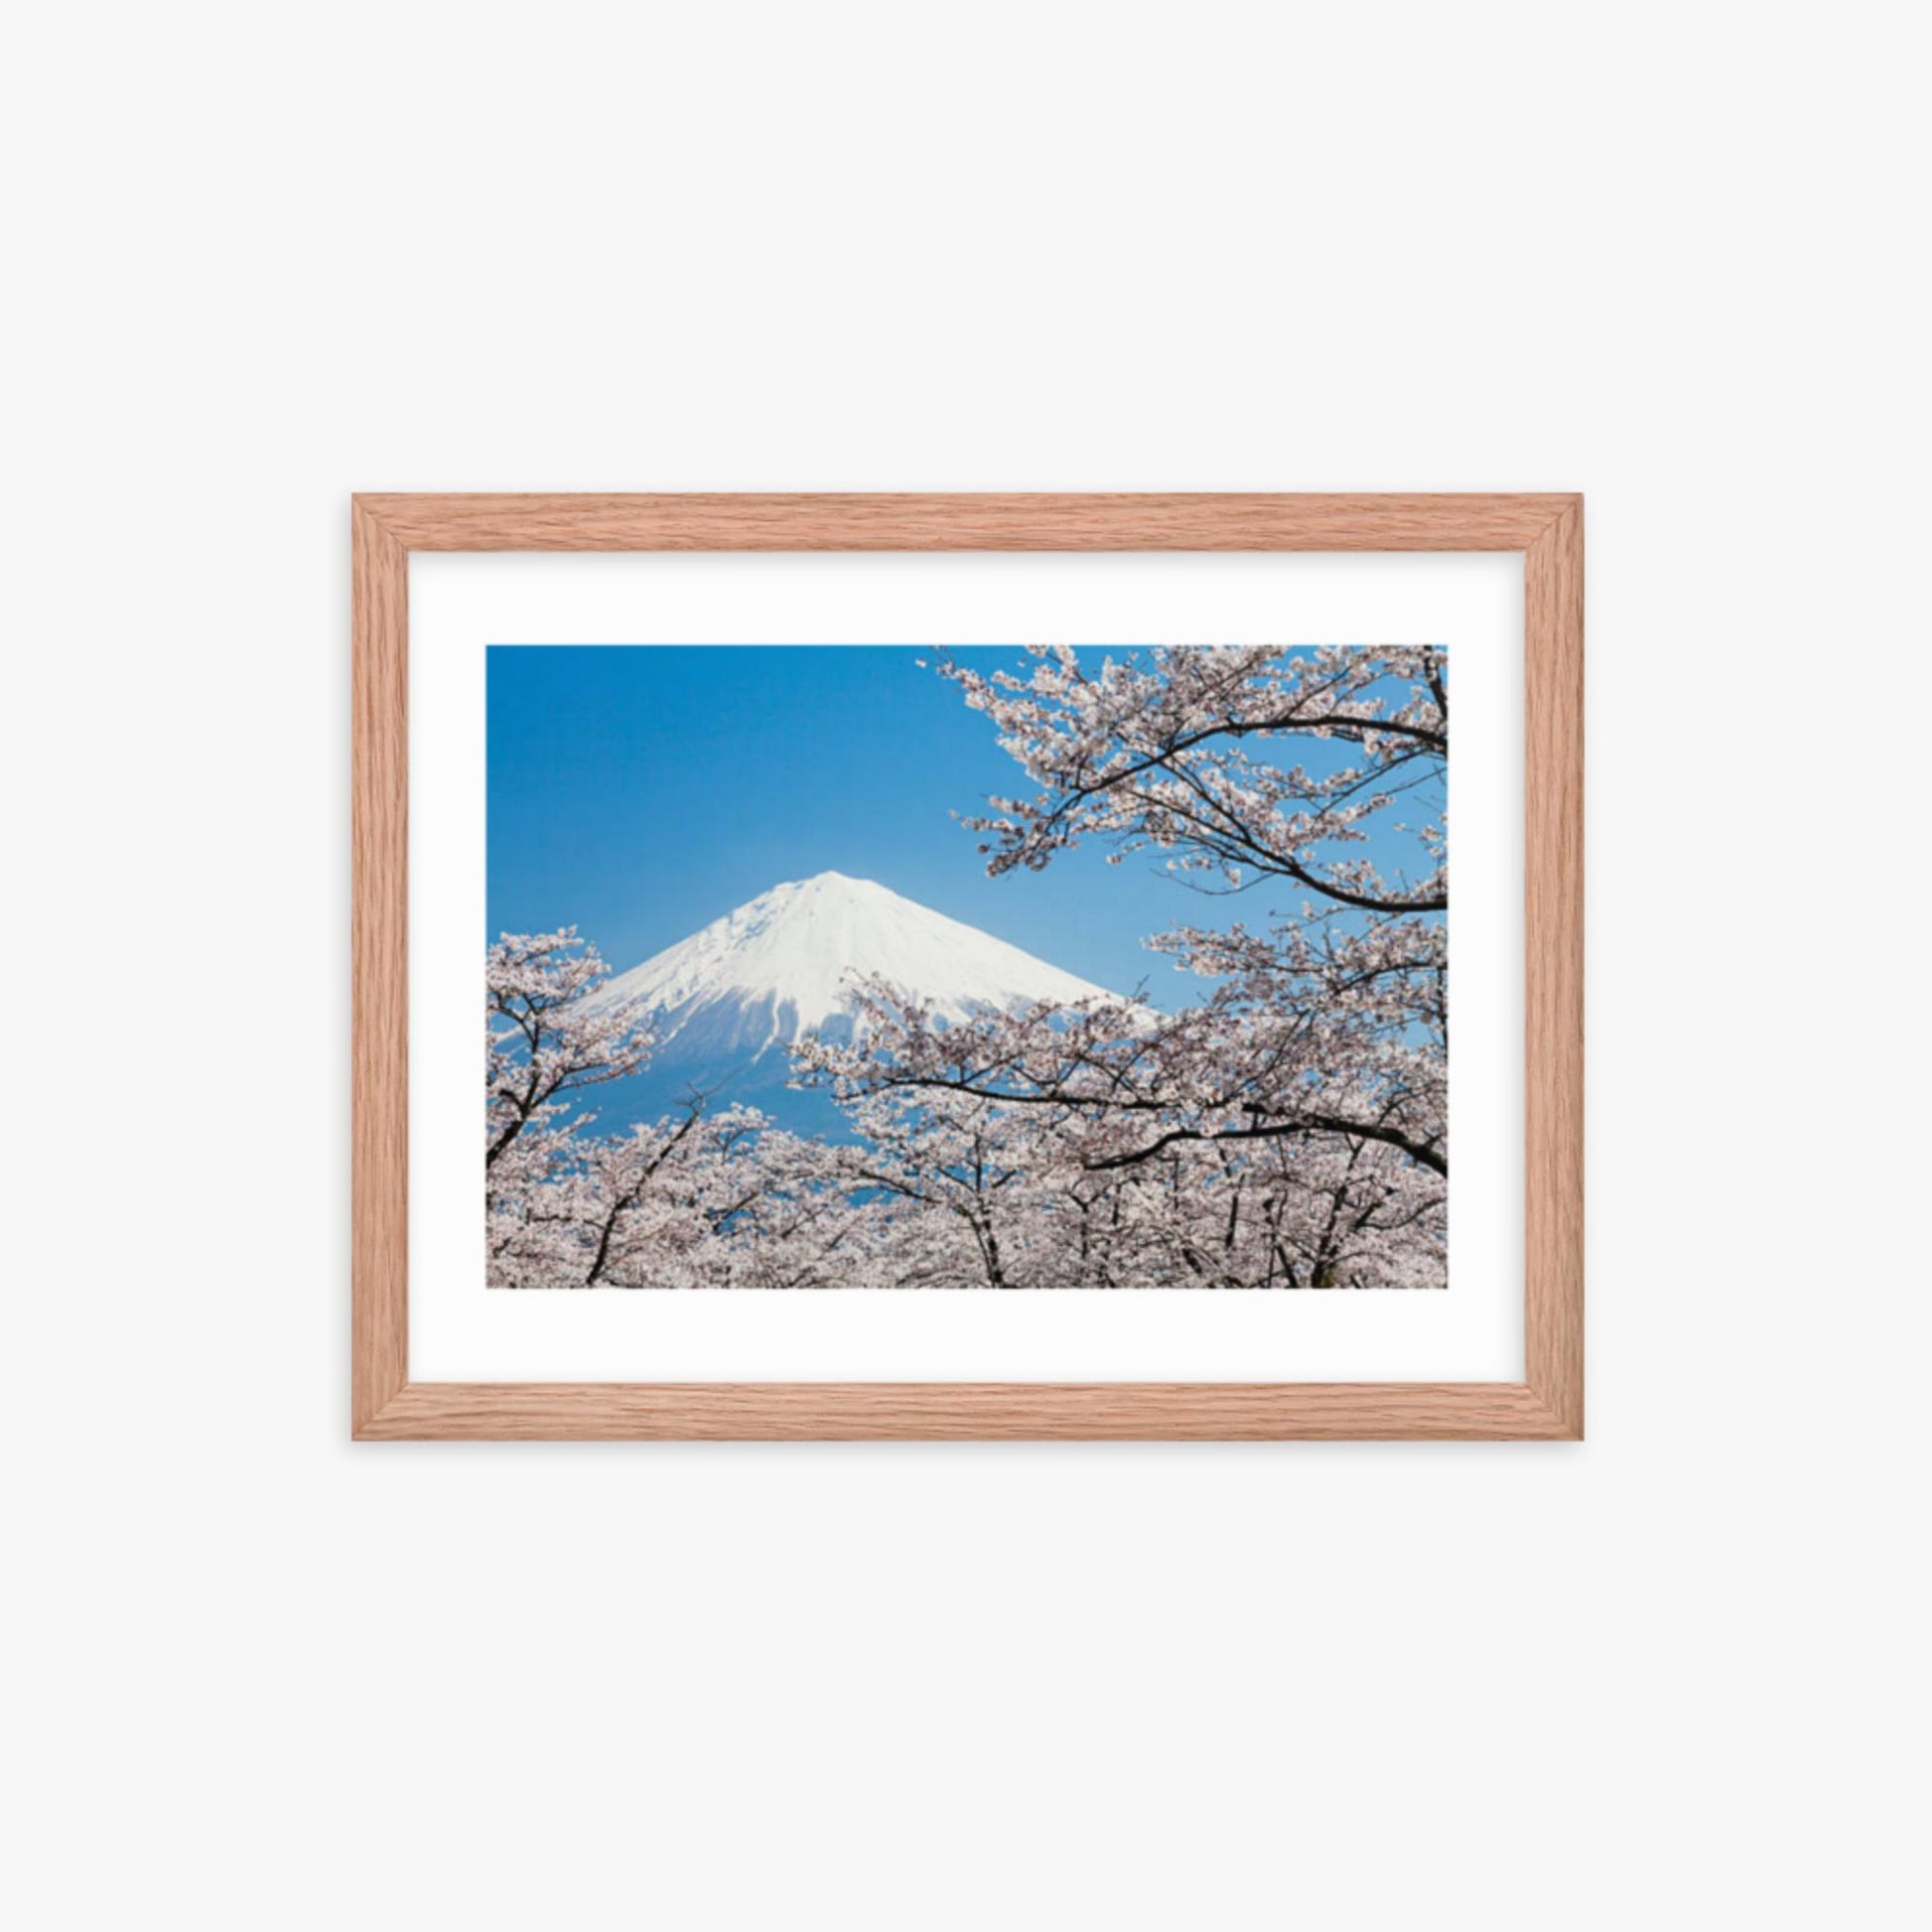 Mount Fuji & Cherry Blossoms 12x16 in Poster With Oak Frame